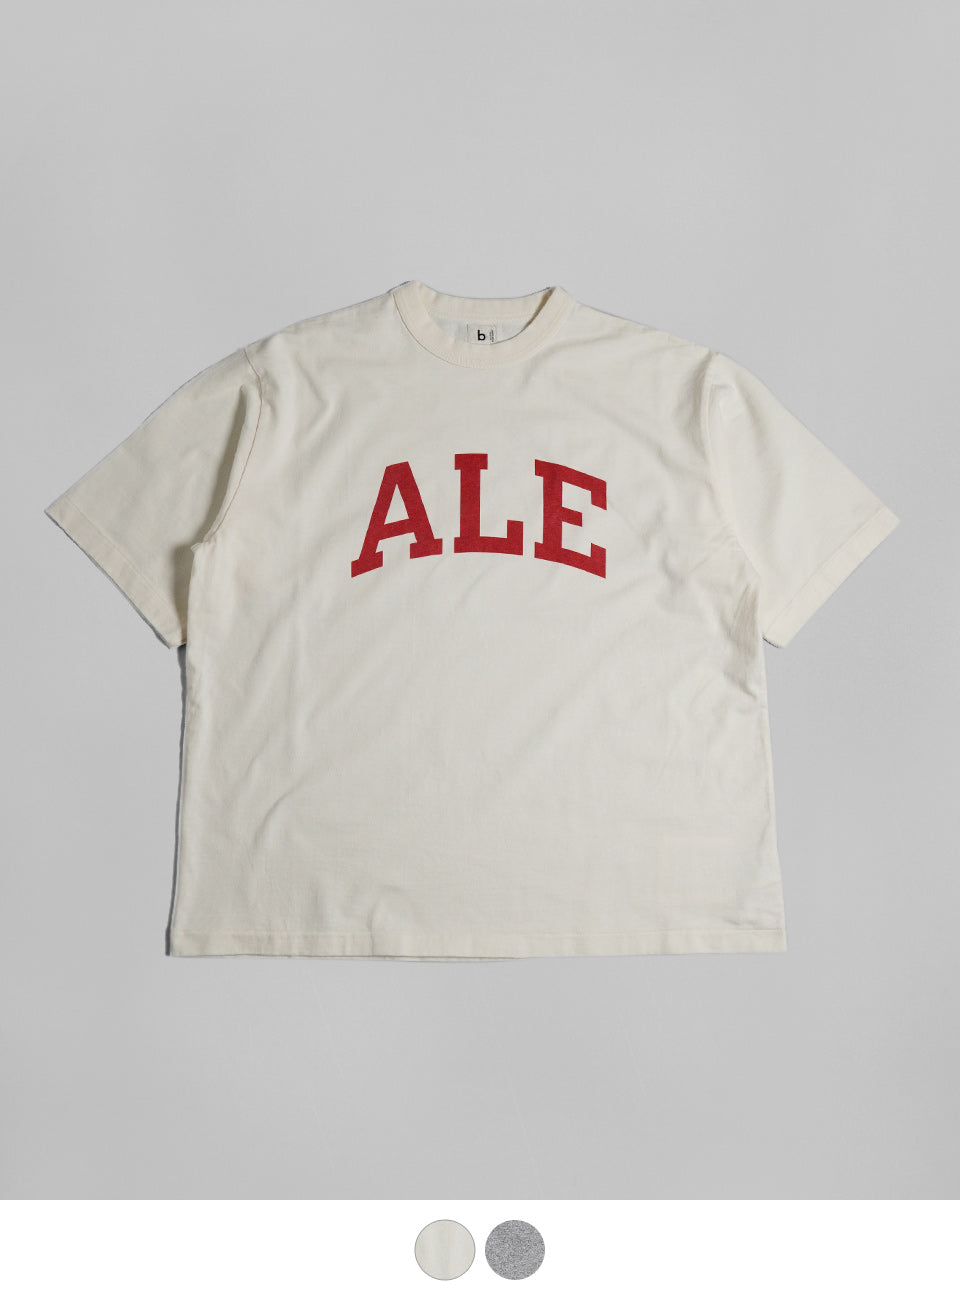 blurhms ROOTSTOCK ブラームス ルーツストック プリント Tシャツ ワイド ALE-Y 88/12 Print Tee WIDE【送料無料】正規取扱店[★]